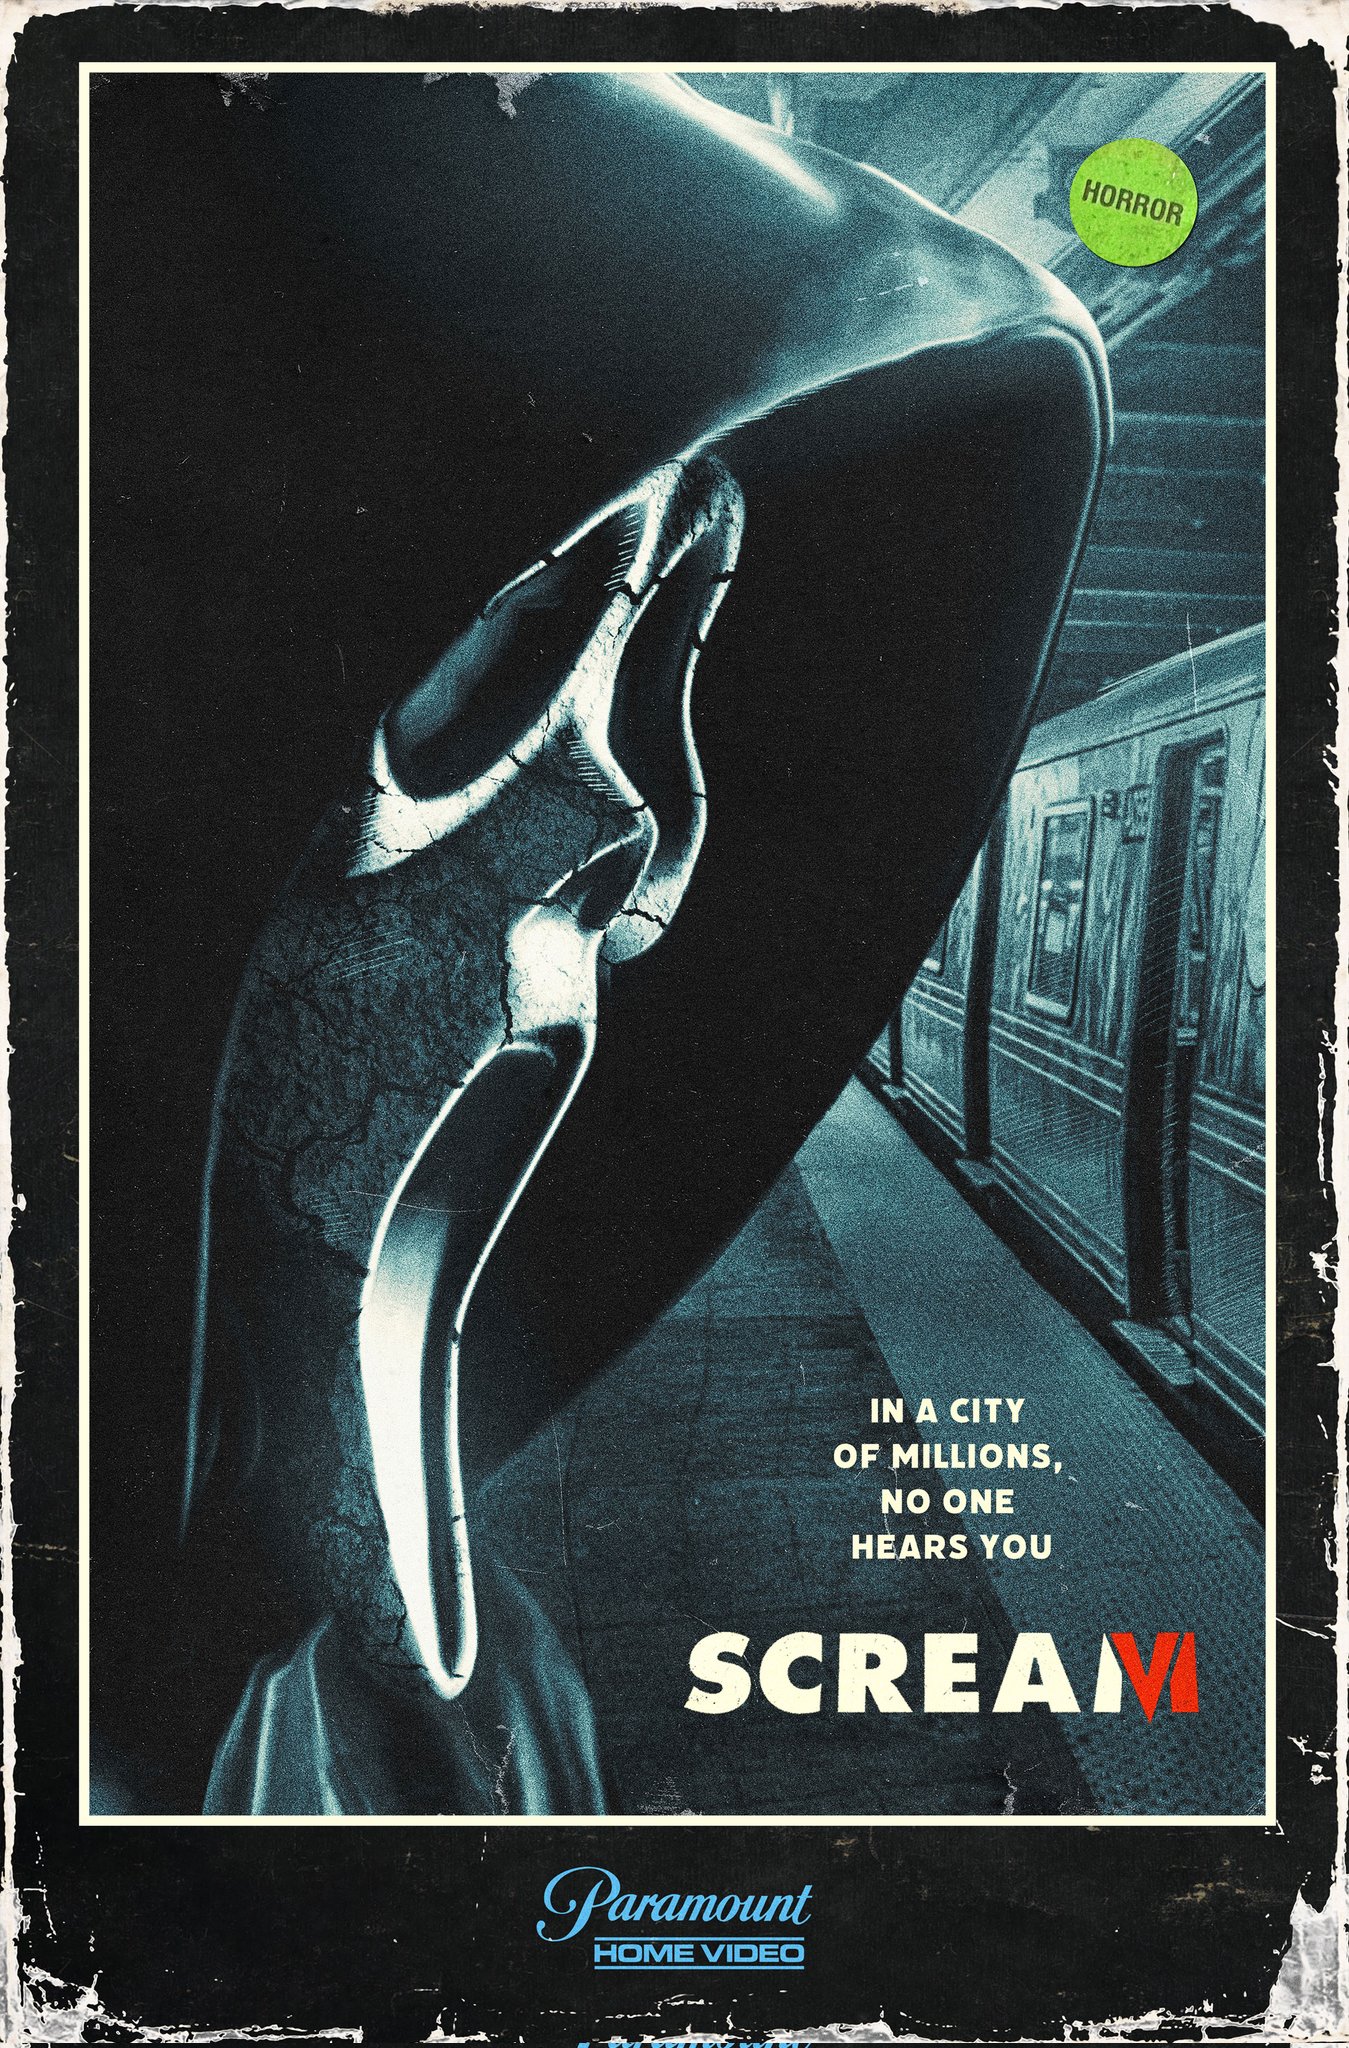 Scream VI' proves to be lulling, repetitive for viewers – The